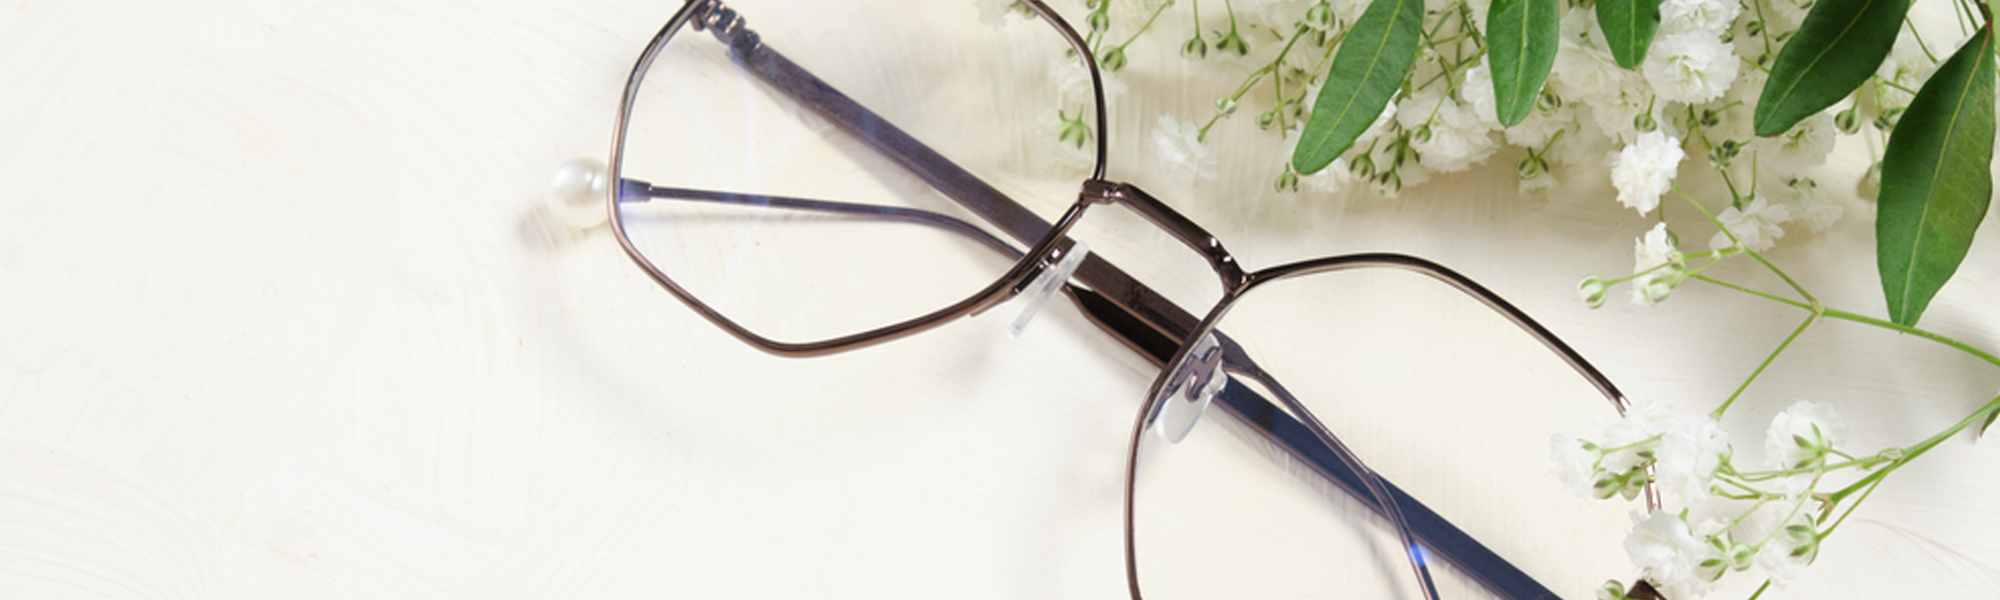 Grant and Glass Opticians - Complete local eyecare you can trust